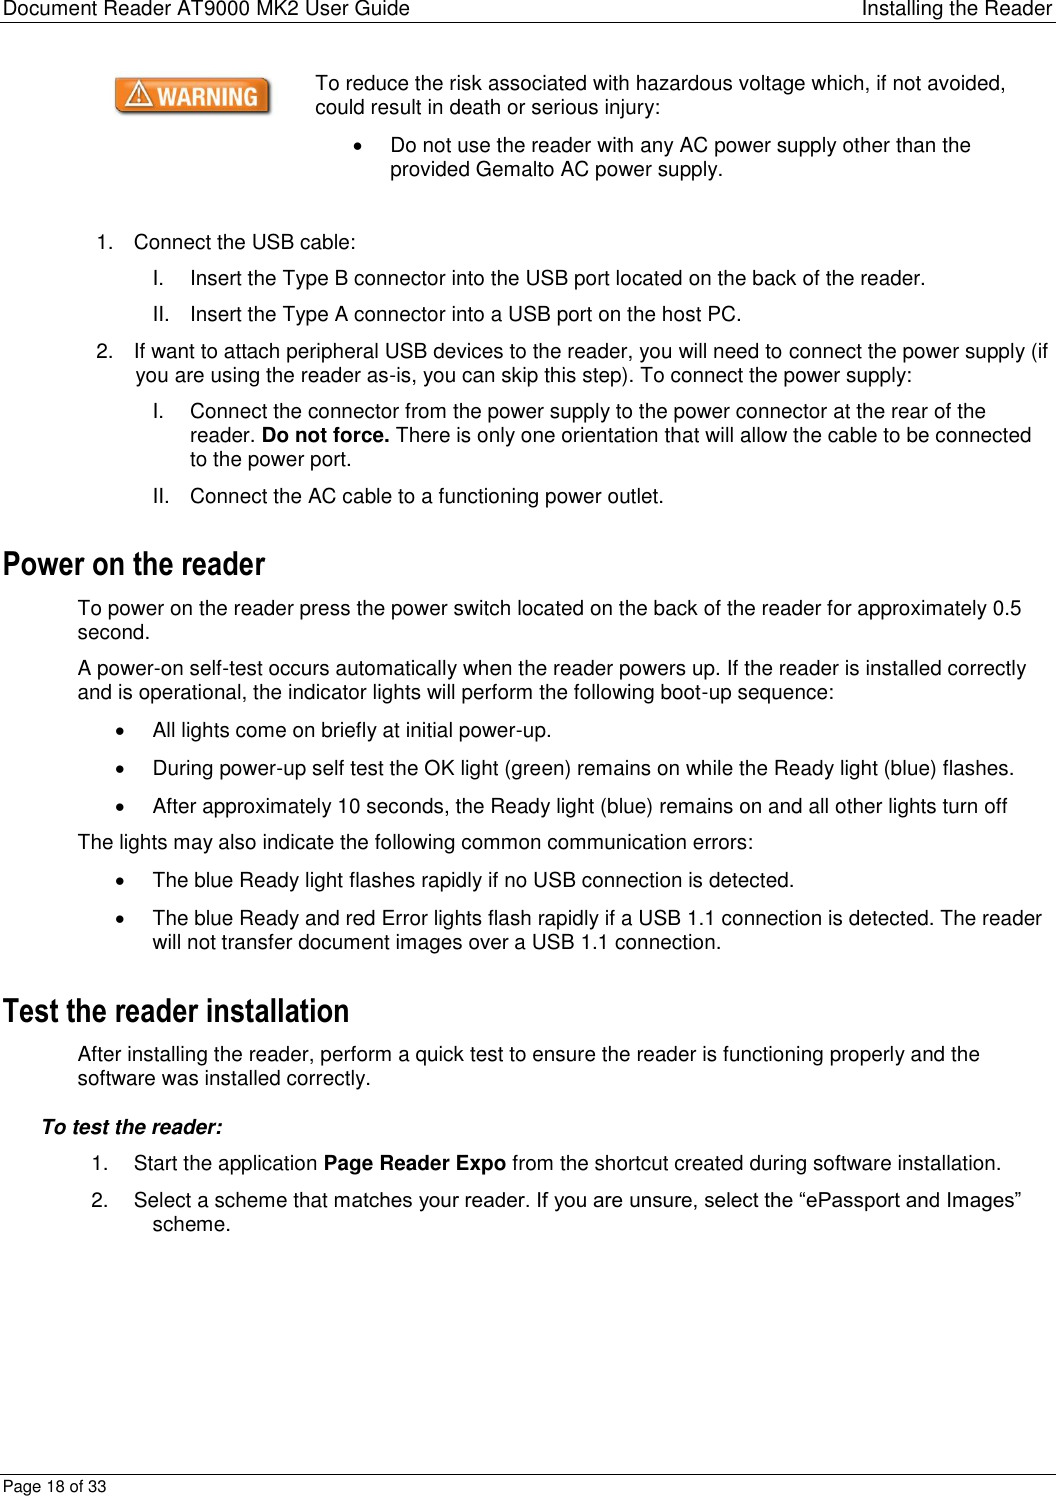 Document Reader AT9000 MK2 User Guide Installing the Reader Page 18 of 33  To reduce the risk associated with hazardous voltage which, if not avoided, could result in death or serious injury:   Do not use the reader with any AC power supply other than the provided Gemalto AC power supply.  1.  Connect the USB cable: I.  Insert the Type B connector into the USB port located on the back of the reader. II.  Insert the Type A connector into a USB port on the host PC. 2.  If want to attach peripheral USB devices to the reader, you will need to connect the power supply (if you are using the reader as-is, you can skip this step). To connect the power supply: I.  Connect the connector from the power supply to the power connector at the rear of the reader. Do not force. There is only one orientation that will allow the cable to be connected to the power port. II.  Connect the AC cable to a functioning power outlet. Power on the reader To power on the reader press the power switch located on the back of the reader for approximately 0.5 second. A power-on self-test occurs automatically when the reader powers up. If the reader is installed correctly and is operational, the indicator lights will perform the following boot-up sequence:   All lights come on briefly at initial power-up.   During power-up self test the OK light (green) remains on while the Ready light (blue) flashes.   After approximately 10 seconds, the Ready light (blue) remains on and all other lights turn off The lights may also indicate the following common communication errors:   The blue Ready light flashes rapidly if no USB connection is detected.   The blue Ready and red Error lights flash rapidly if a USB 1.1 connection is detected. The reader will not transfer document images over a USB 1.1 connection. Test the reader installation After installing the reader, perform a quick test to ensure the reader is functioning properly and the software was installed correctly. To test the reader: 1.  Start the application Page Reader Expo from the shortcut created during software installation. 2.  Select a scheme that matches your reader. If you are unsure, select the “ePassport and Images” scheme. 